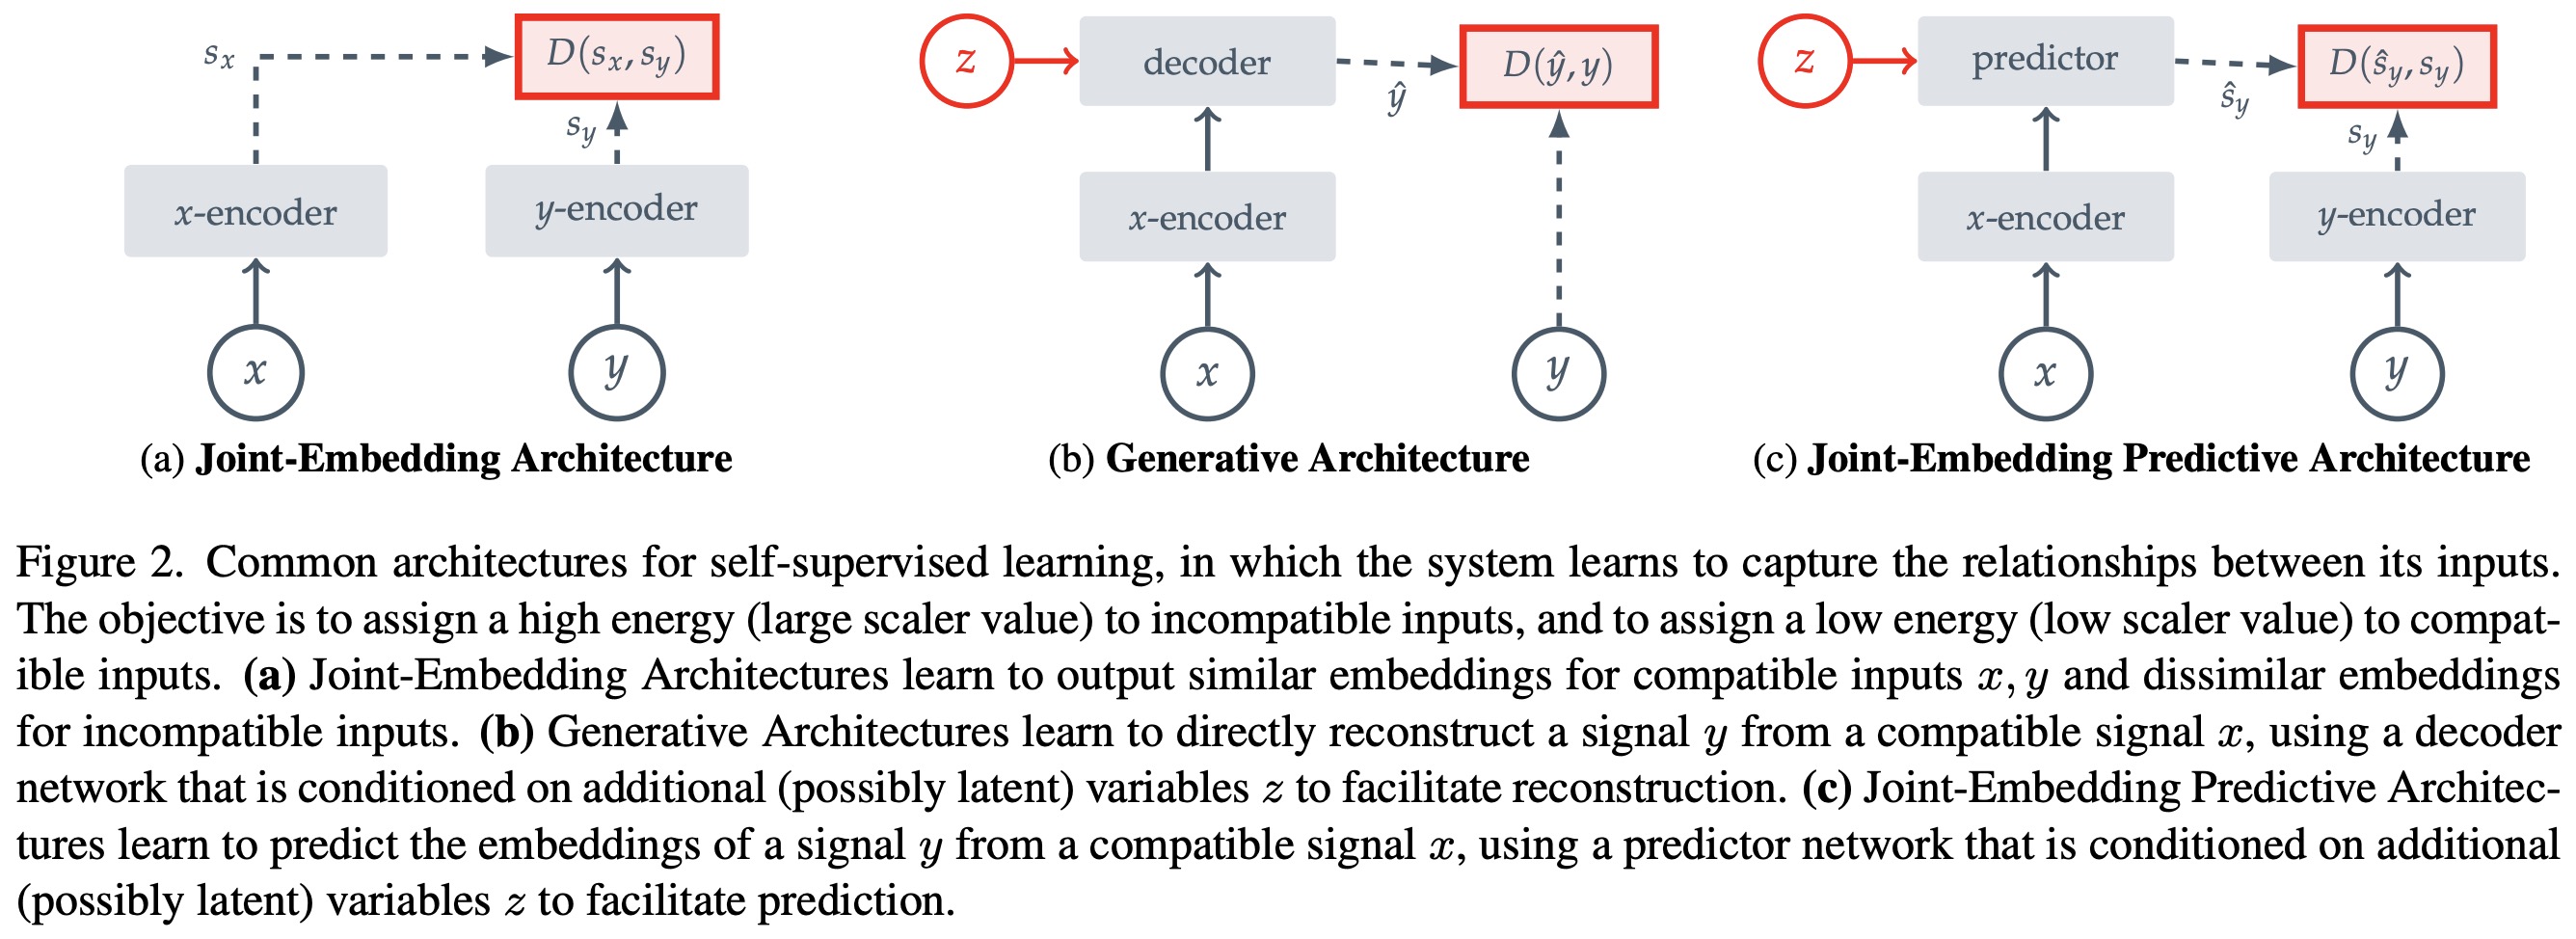 Common architectures for self-supervised learning